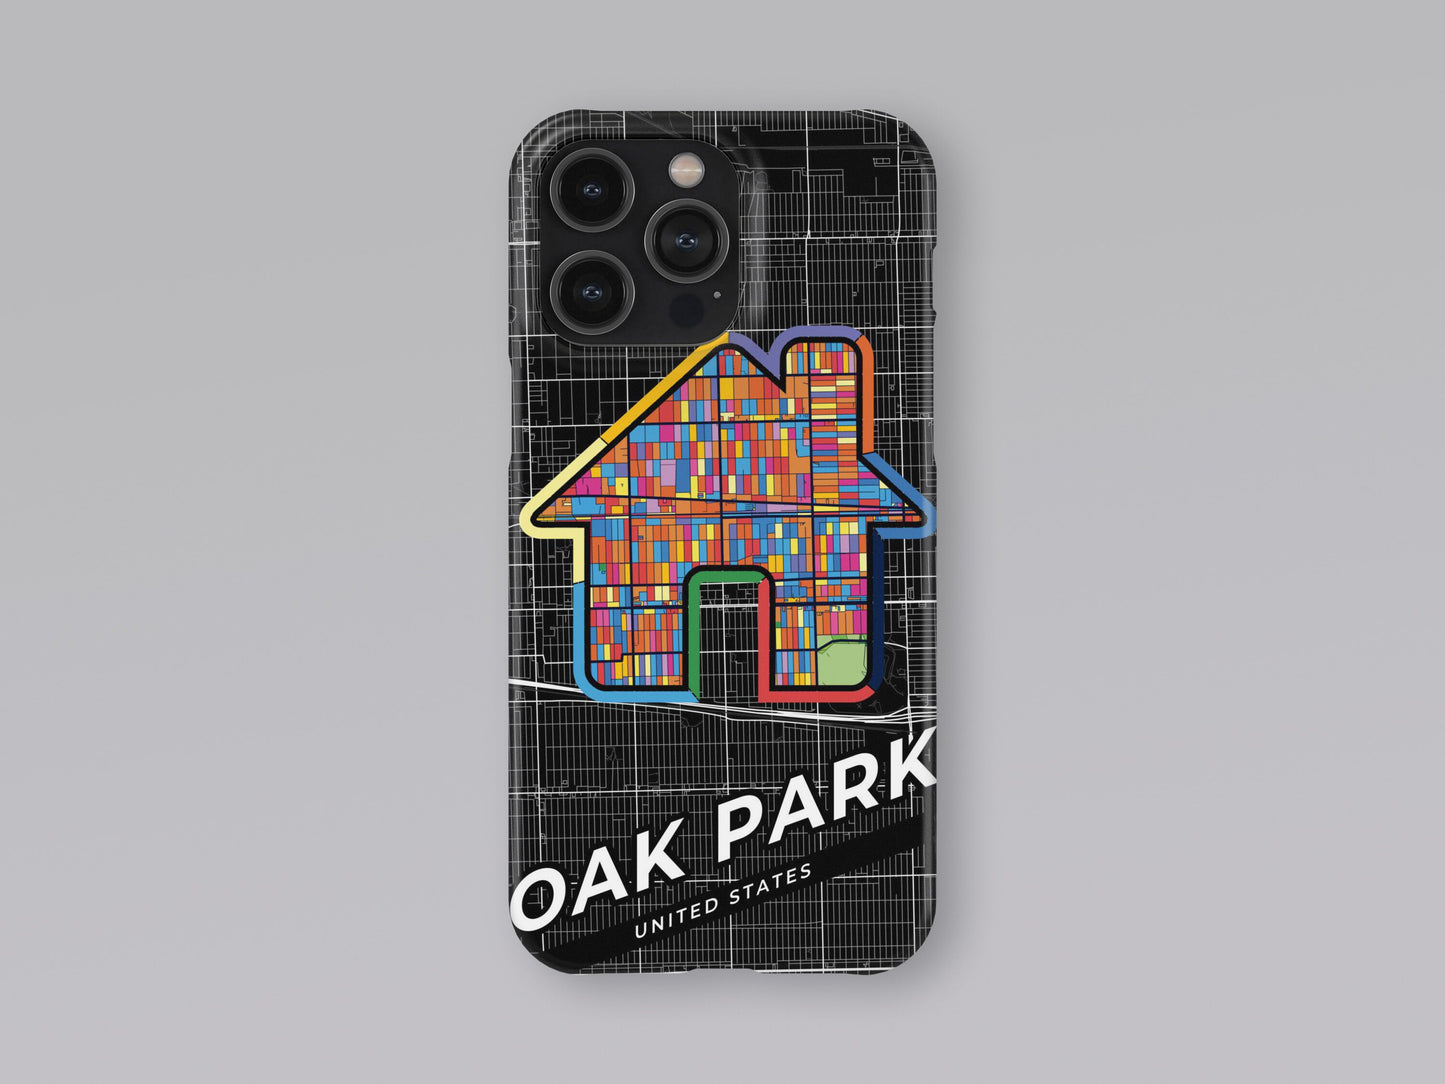 Oak Park Illinois slim phone case with colorful icon. Birthday, wedding or housewarming gift. Couple match cases. 3